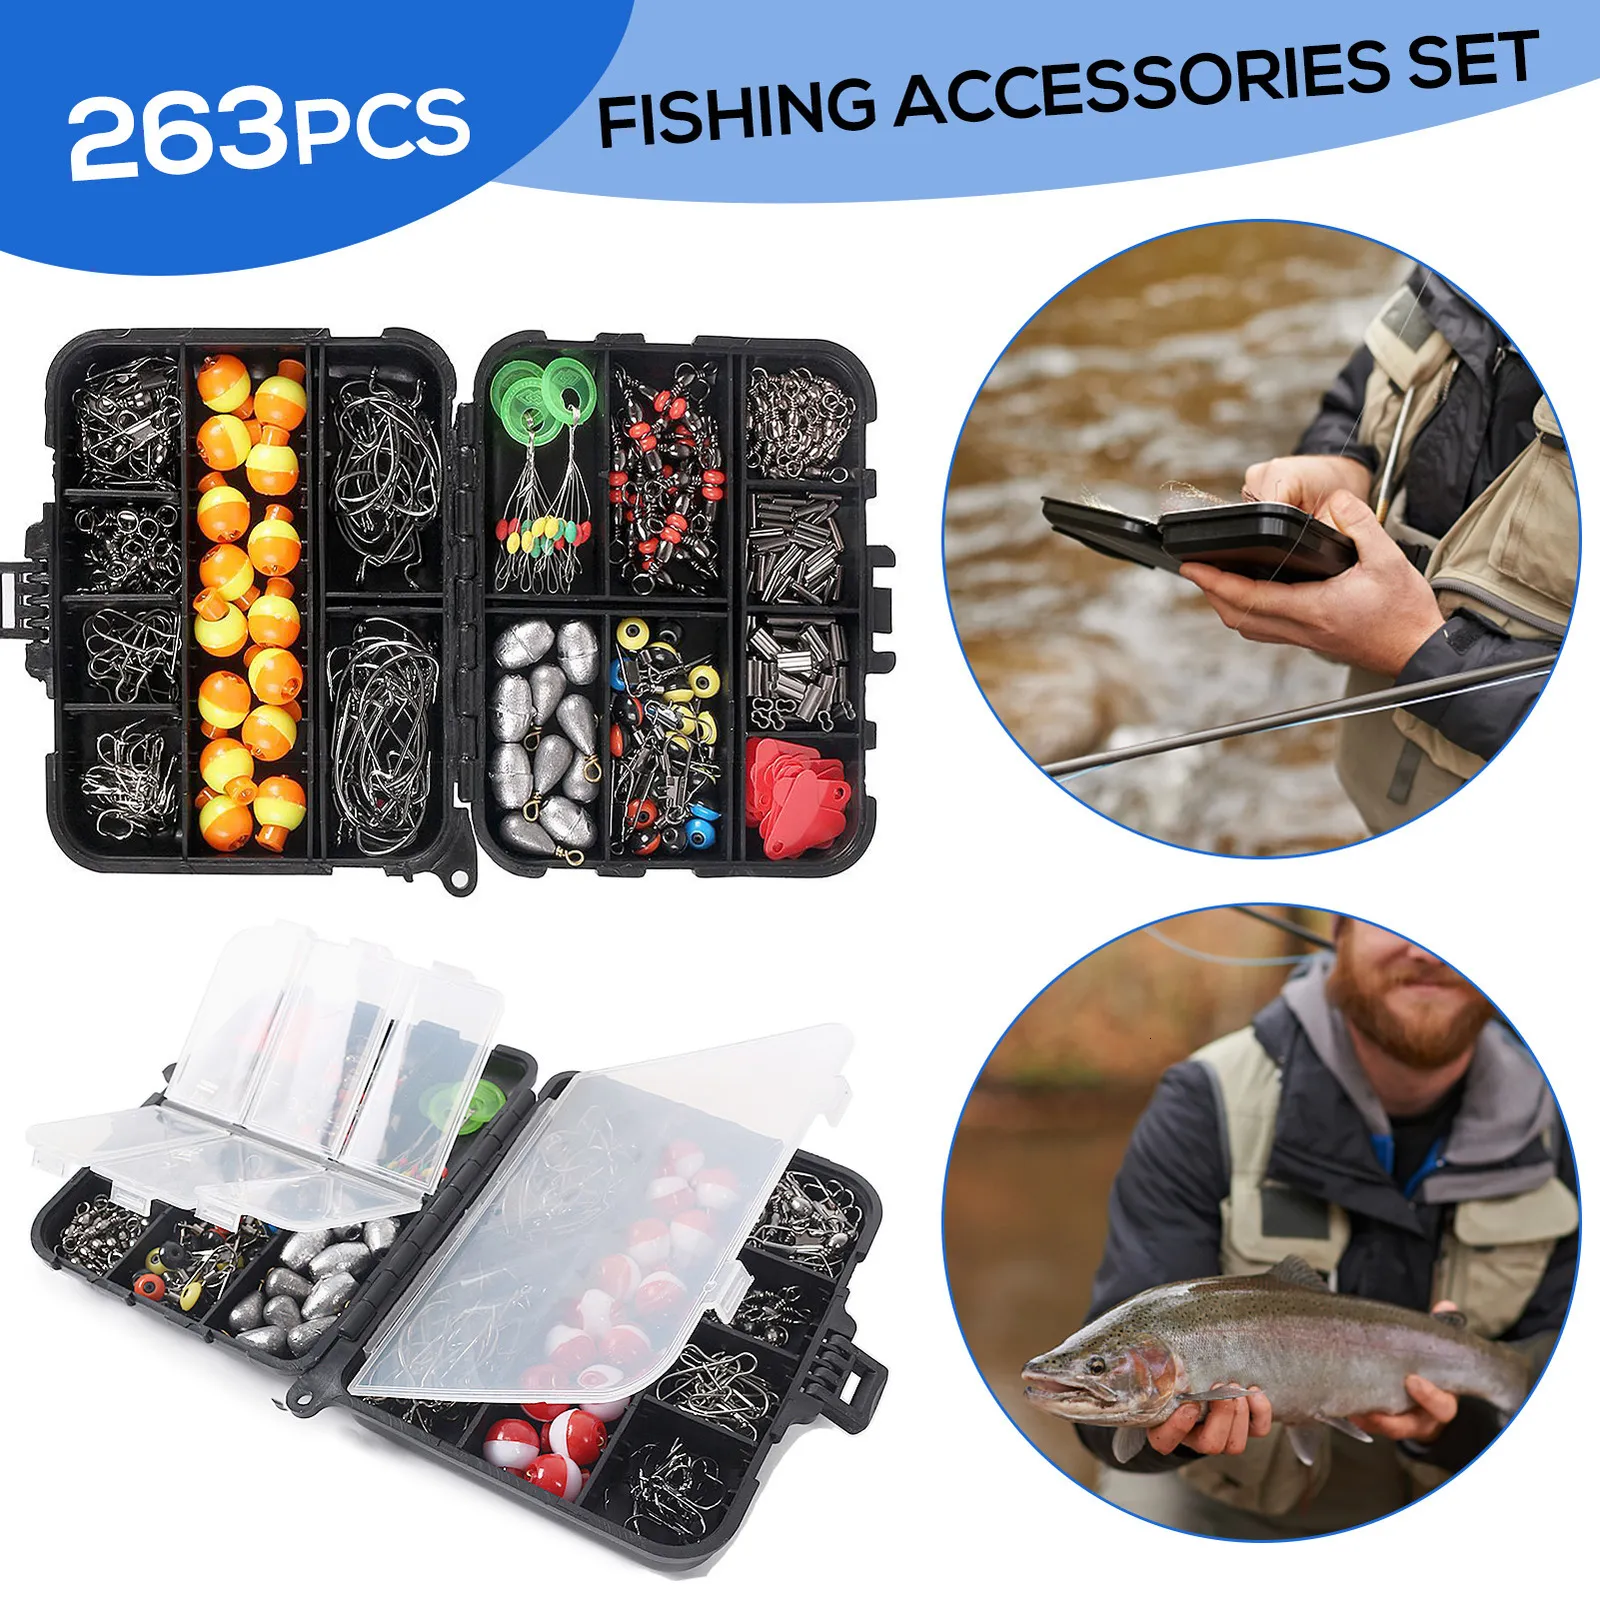 Fishing Hooks Set Fishing Accessories Set With Tackle Box